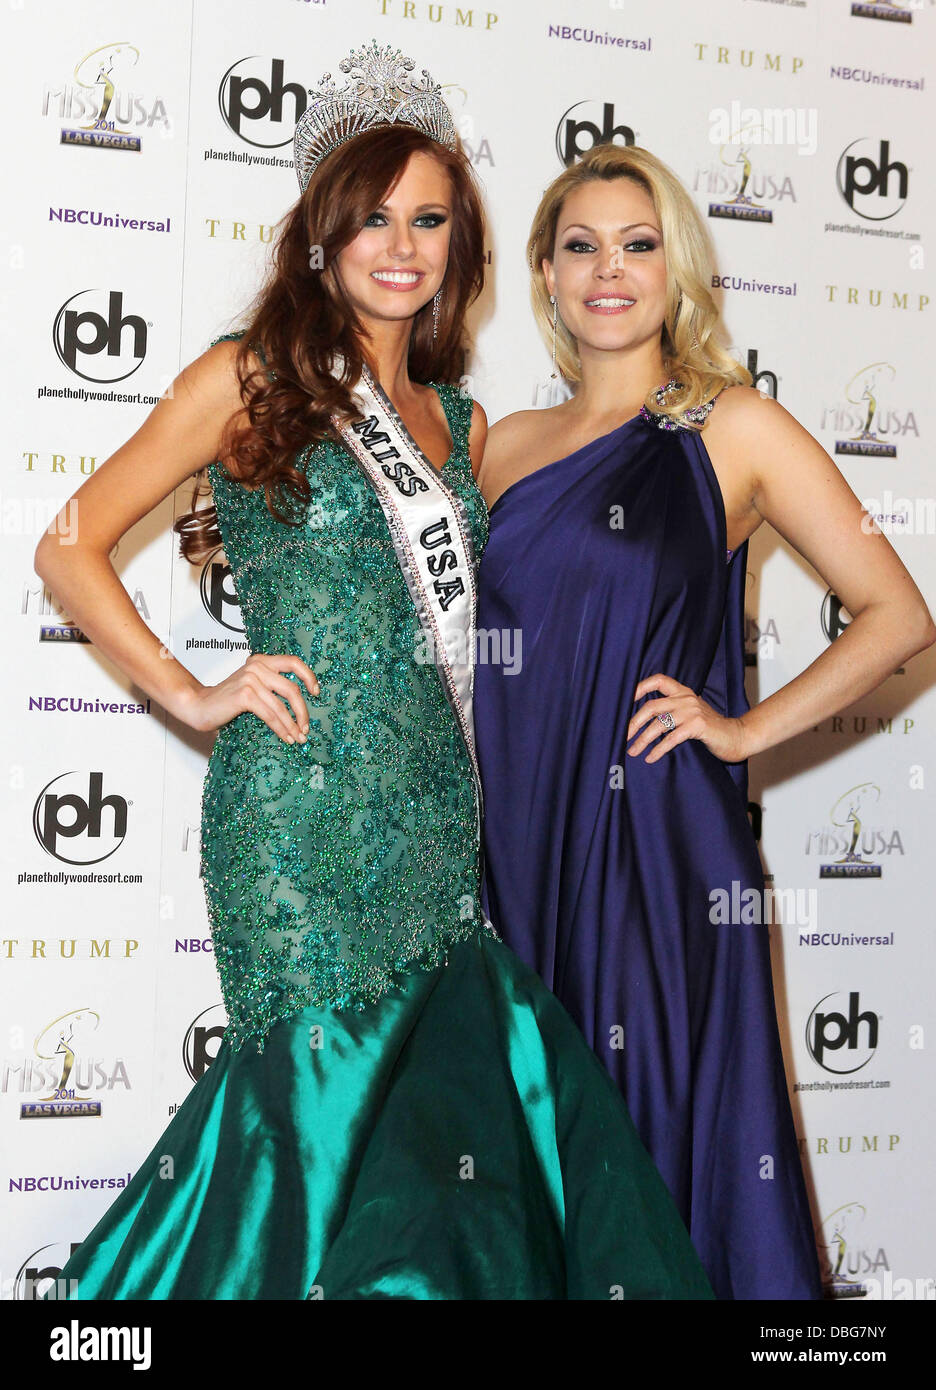 2011 Miss Usa Alyssa Campanella And Shanna Moakler 2011 Miss Usa Press Conference At Planet 